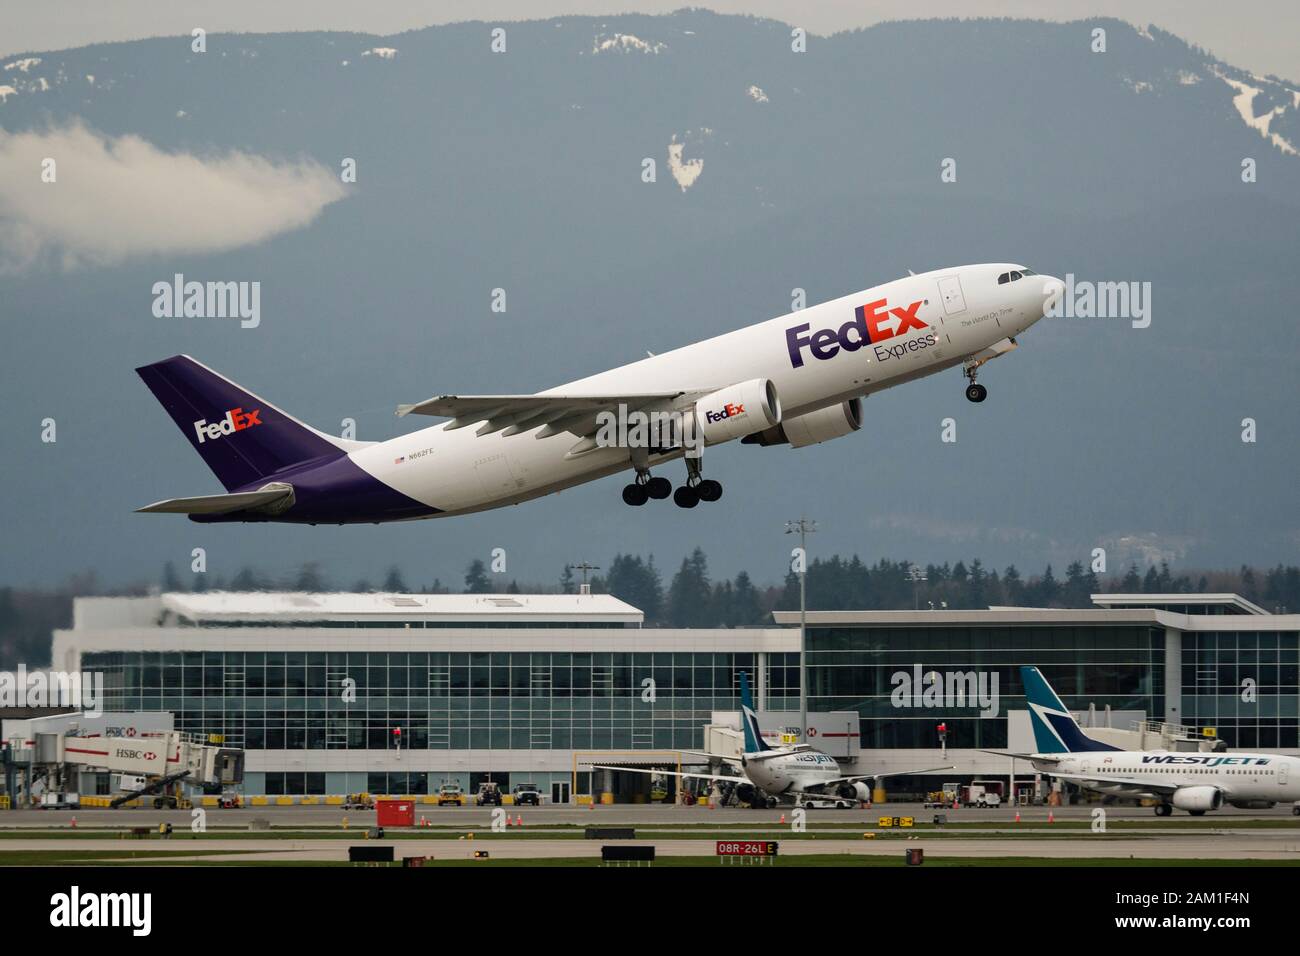 A FedEx Airbus A300 (A300F4-605R) air cargo freighter takes off from Vancouver International Airport Stock Photo